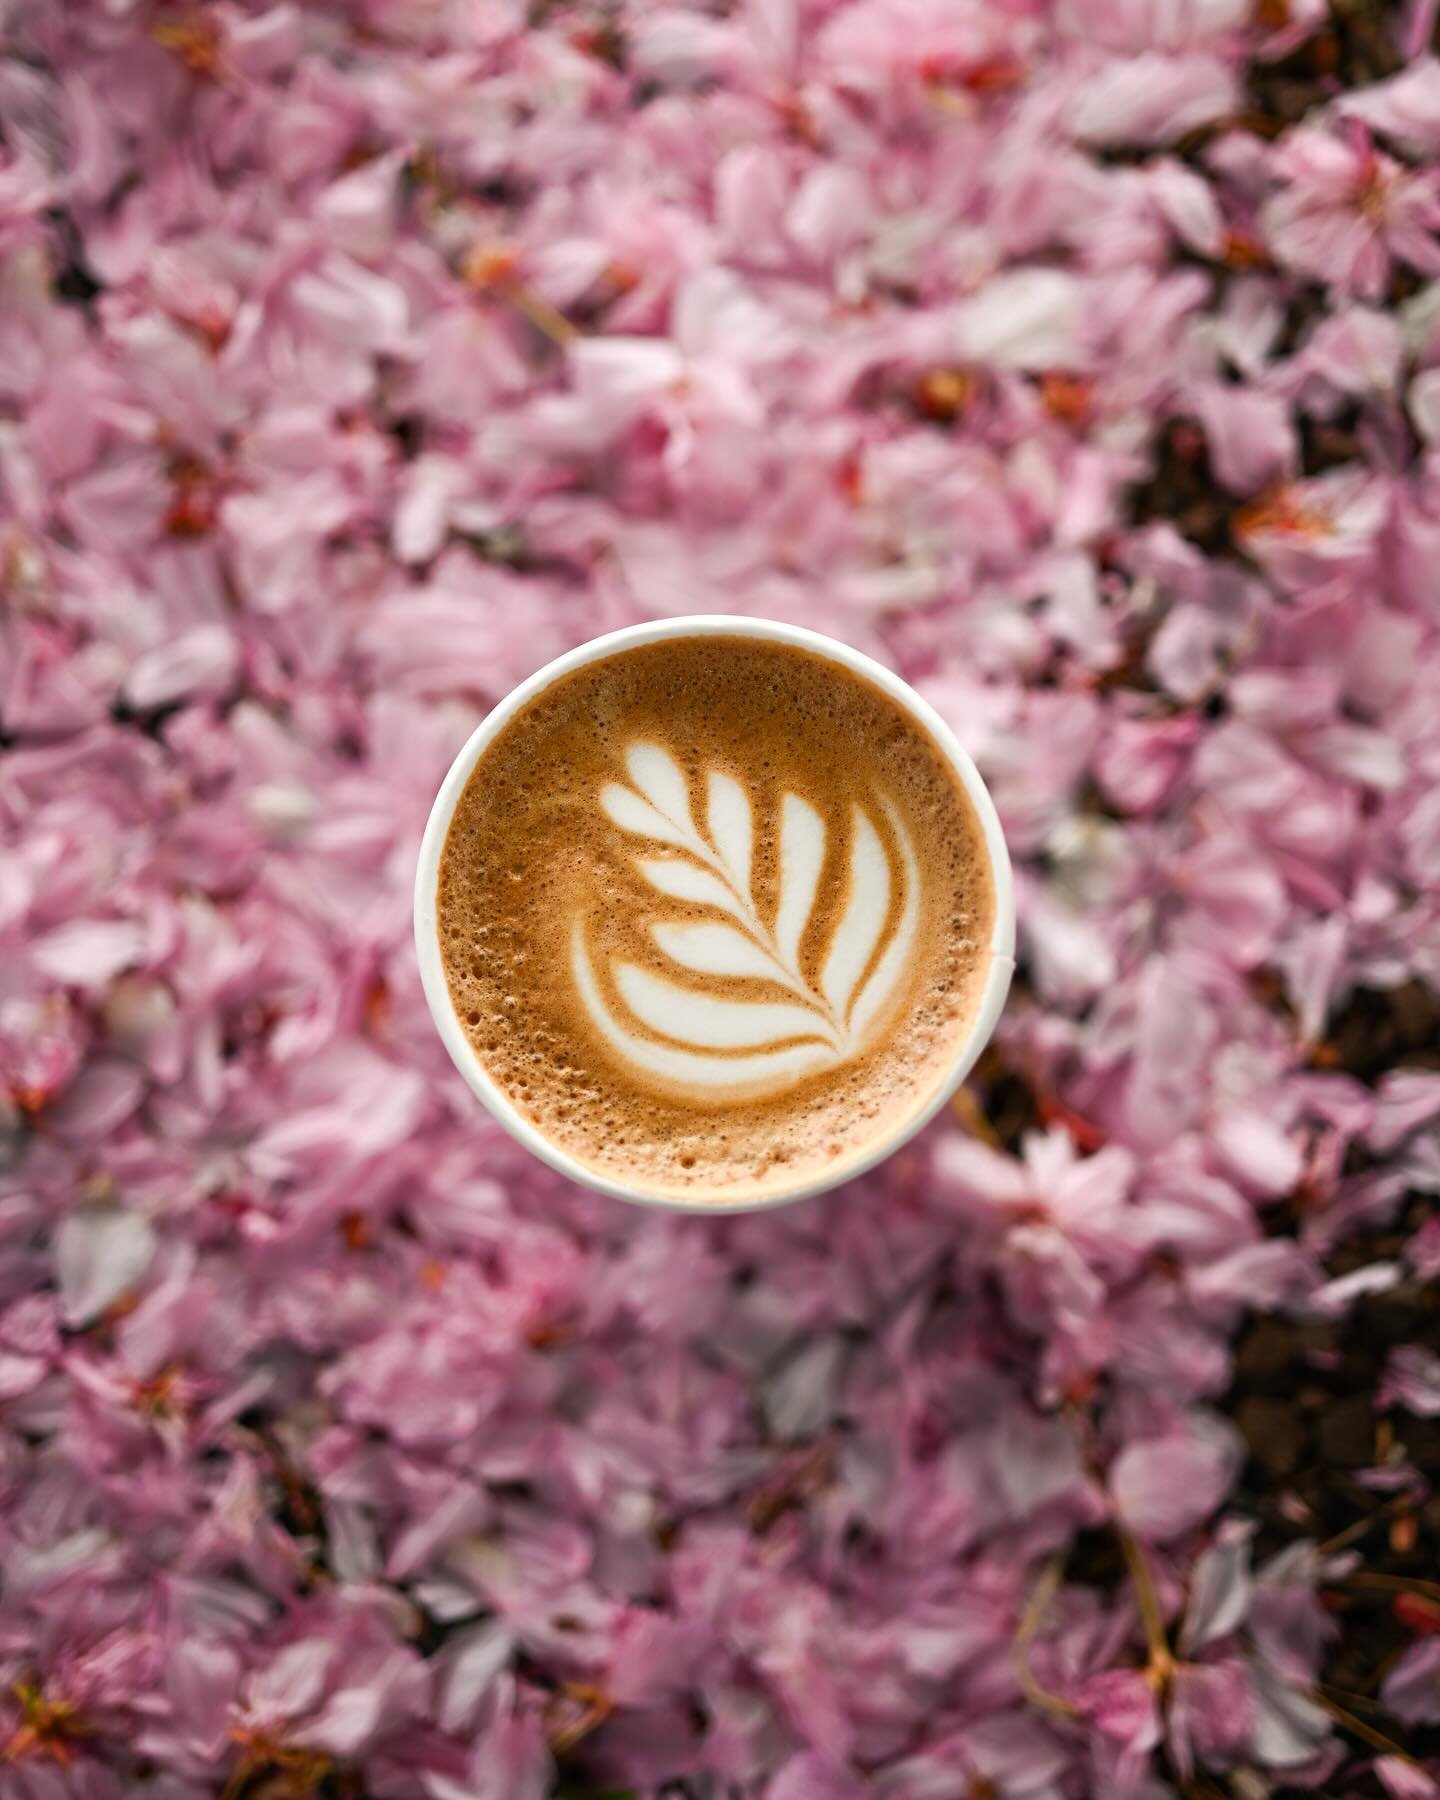 spring photo dump ☕️

this spring has been everything: hot and cold, busy and slow, change and sameness. 

hopefully the rest of the season holds more time for a few coffee moments, flowers from the garden, good outfits and sweet moments with family 